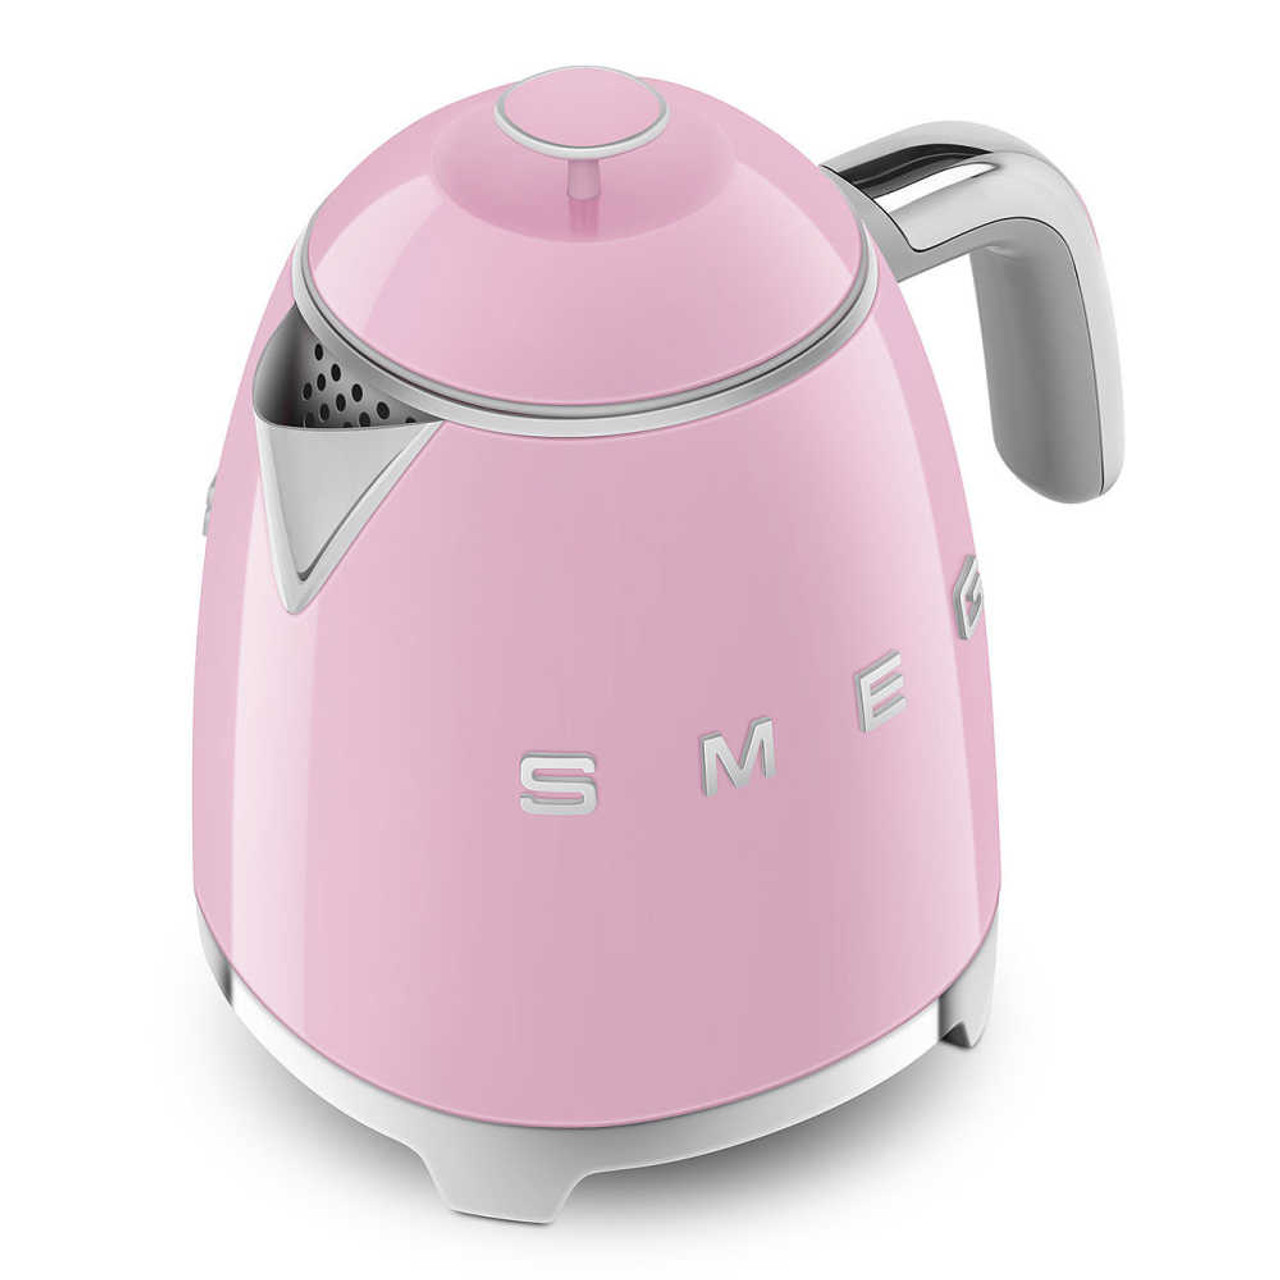 https://cdn11.bigcommerce.com/s-hccytny0od/images/stencil/1280x1280/products/4253/16111/smeg-mini-electric-kettle-pink__66838.1630247847.jpg?c=2?imbypass=on